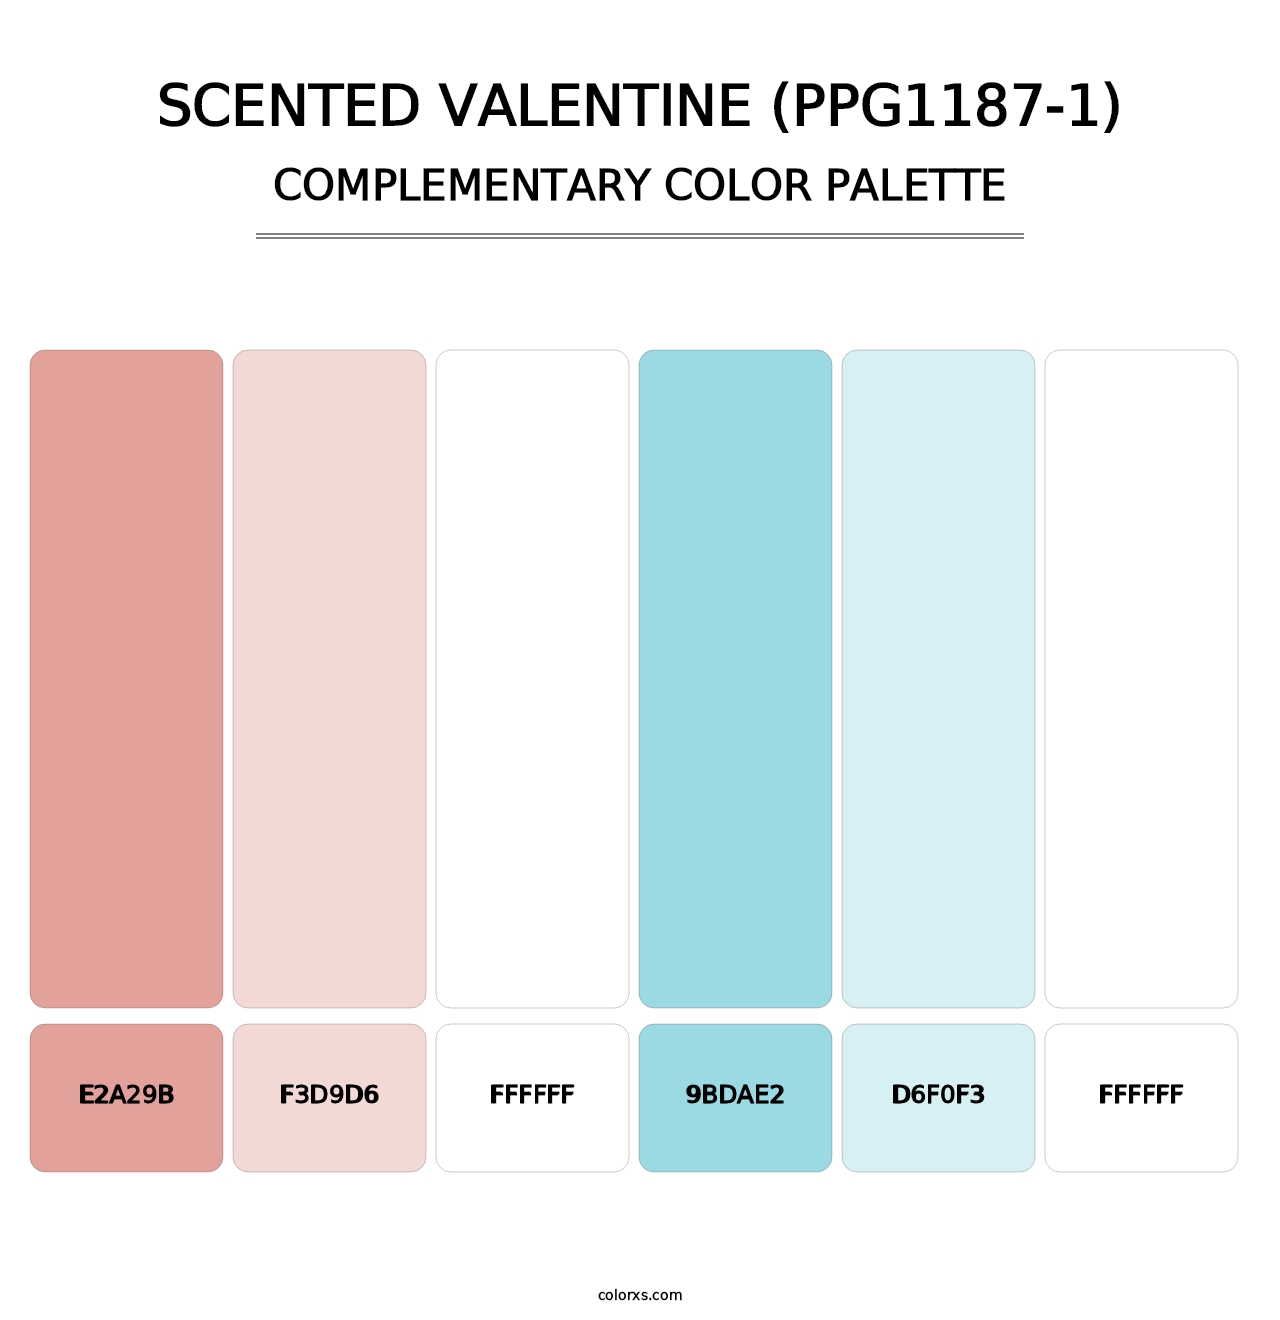 Scented Valentine (PPG1187-1) - Complementary Color Palette